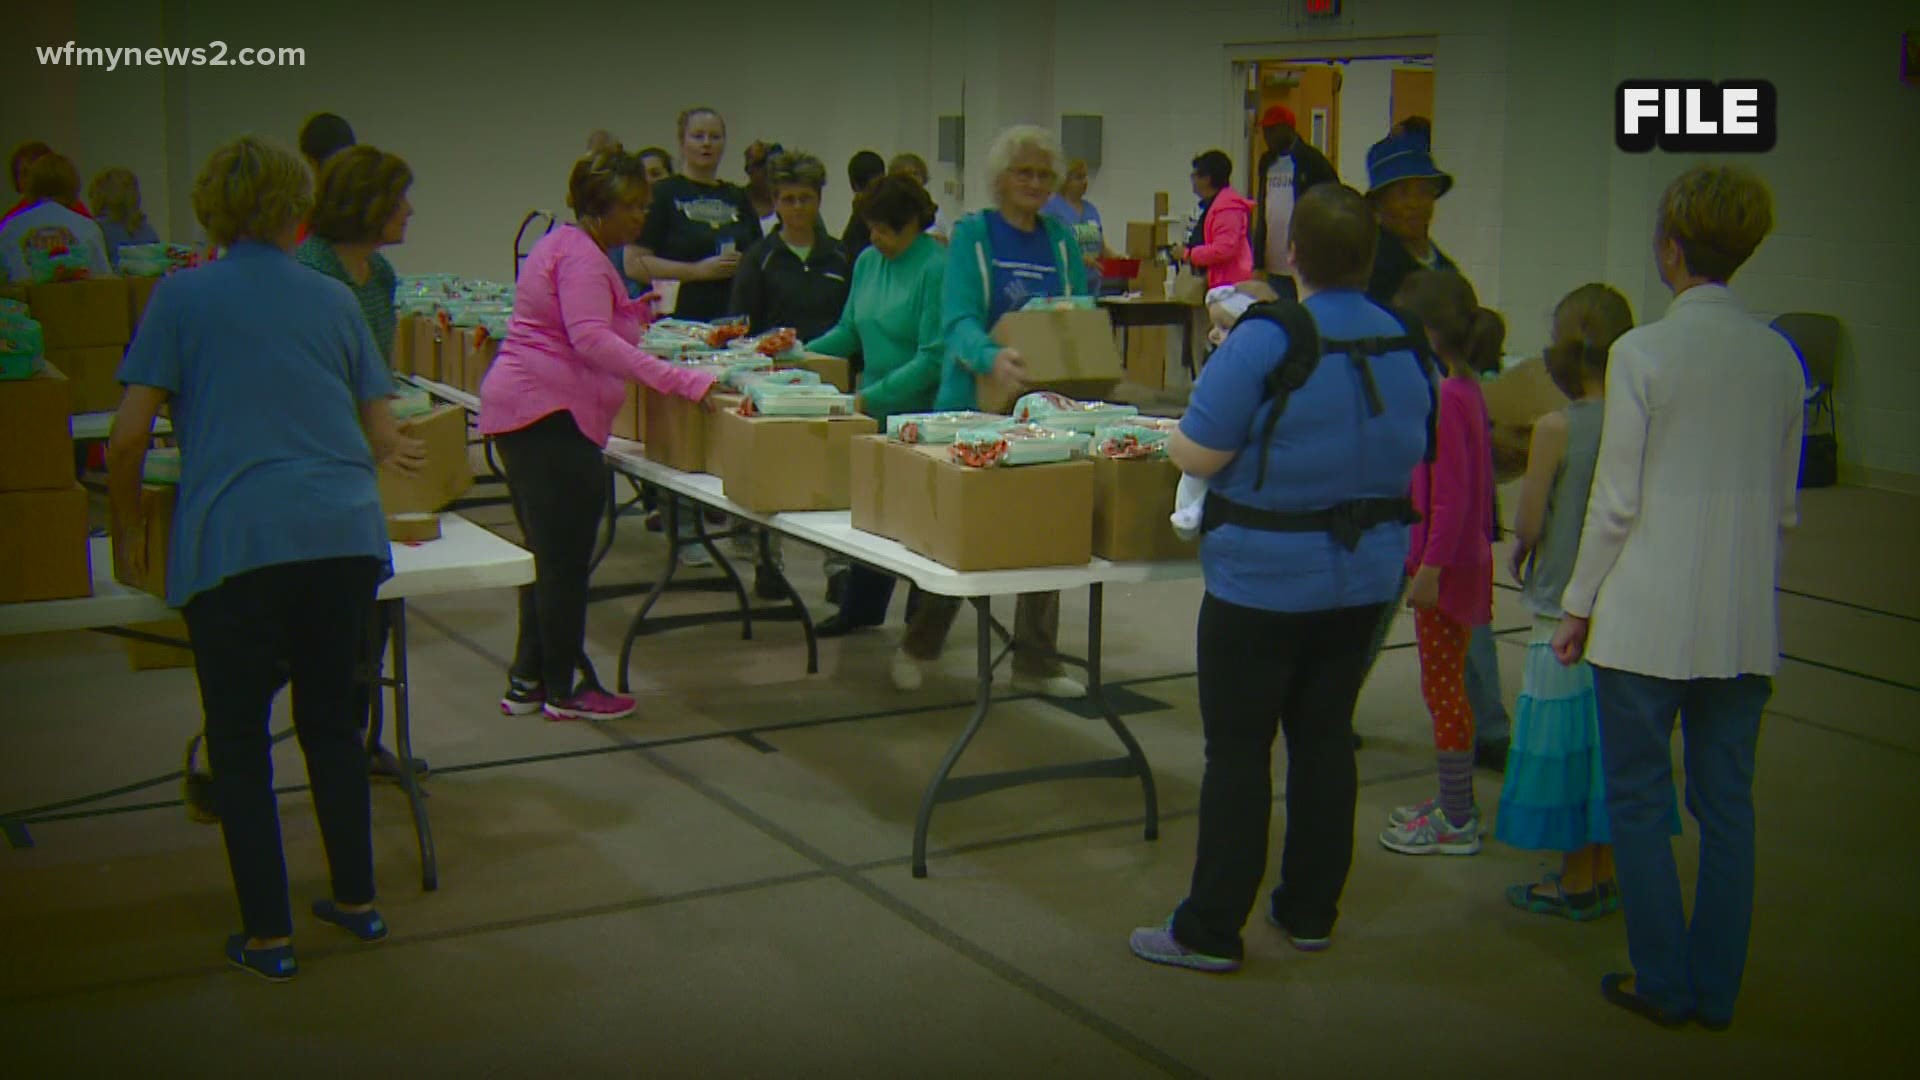 Even during the coronavirus pandemic, plenty of people in the Triad look to the event for help around Thanksgiving.